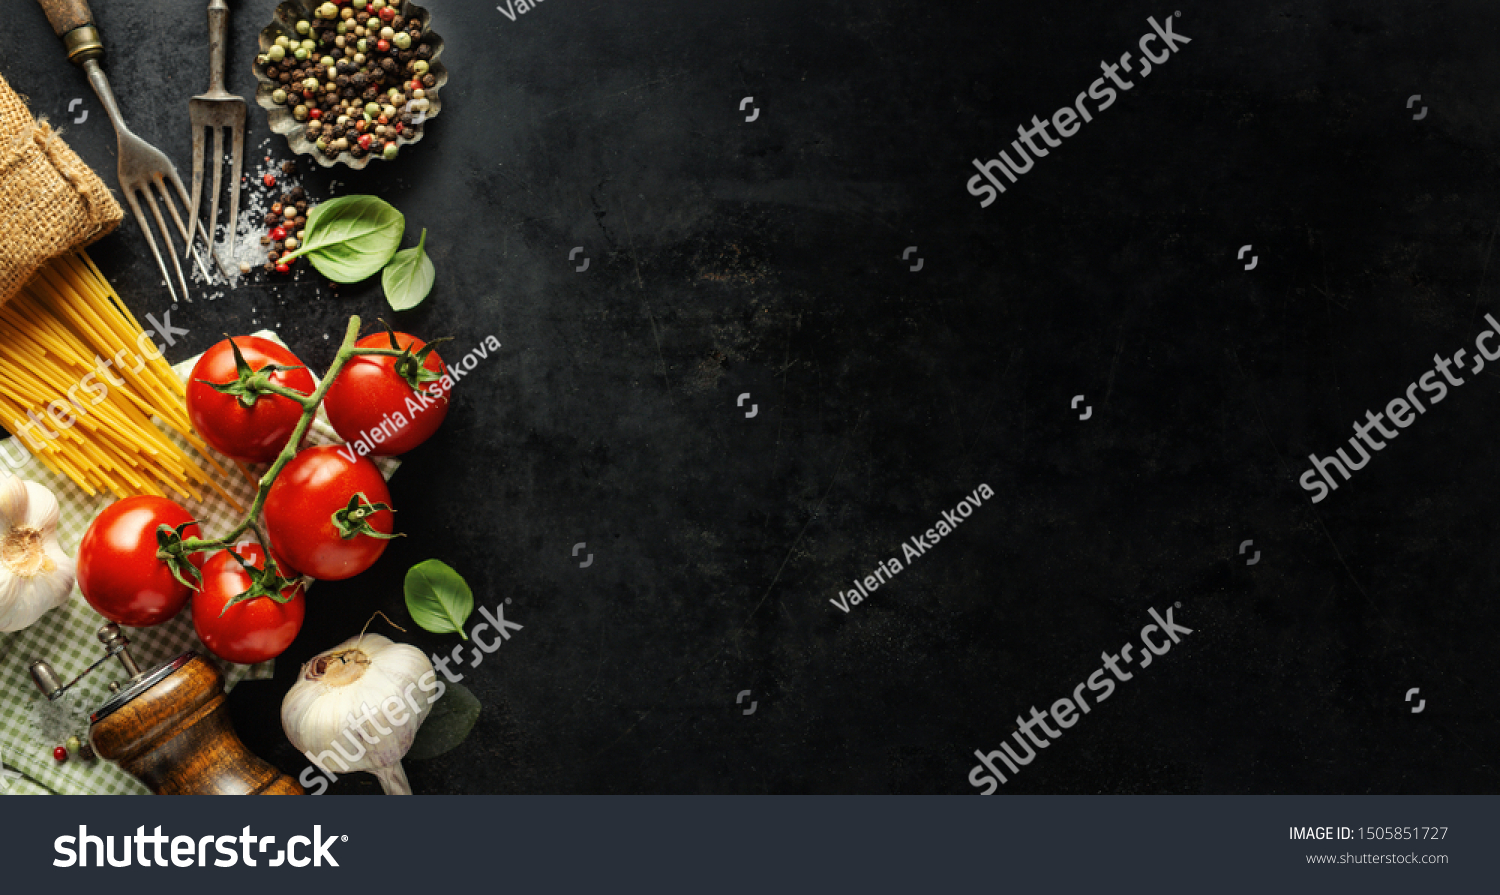 Italian food background. Italian cuisine. Ingredients on dark background. Cooking concept. Cooking background #1505851727